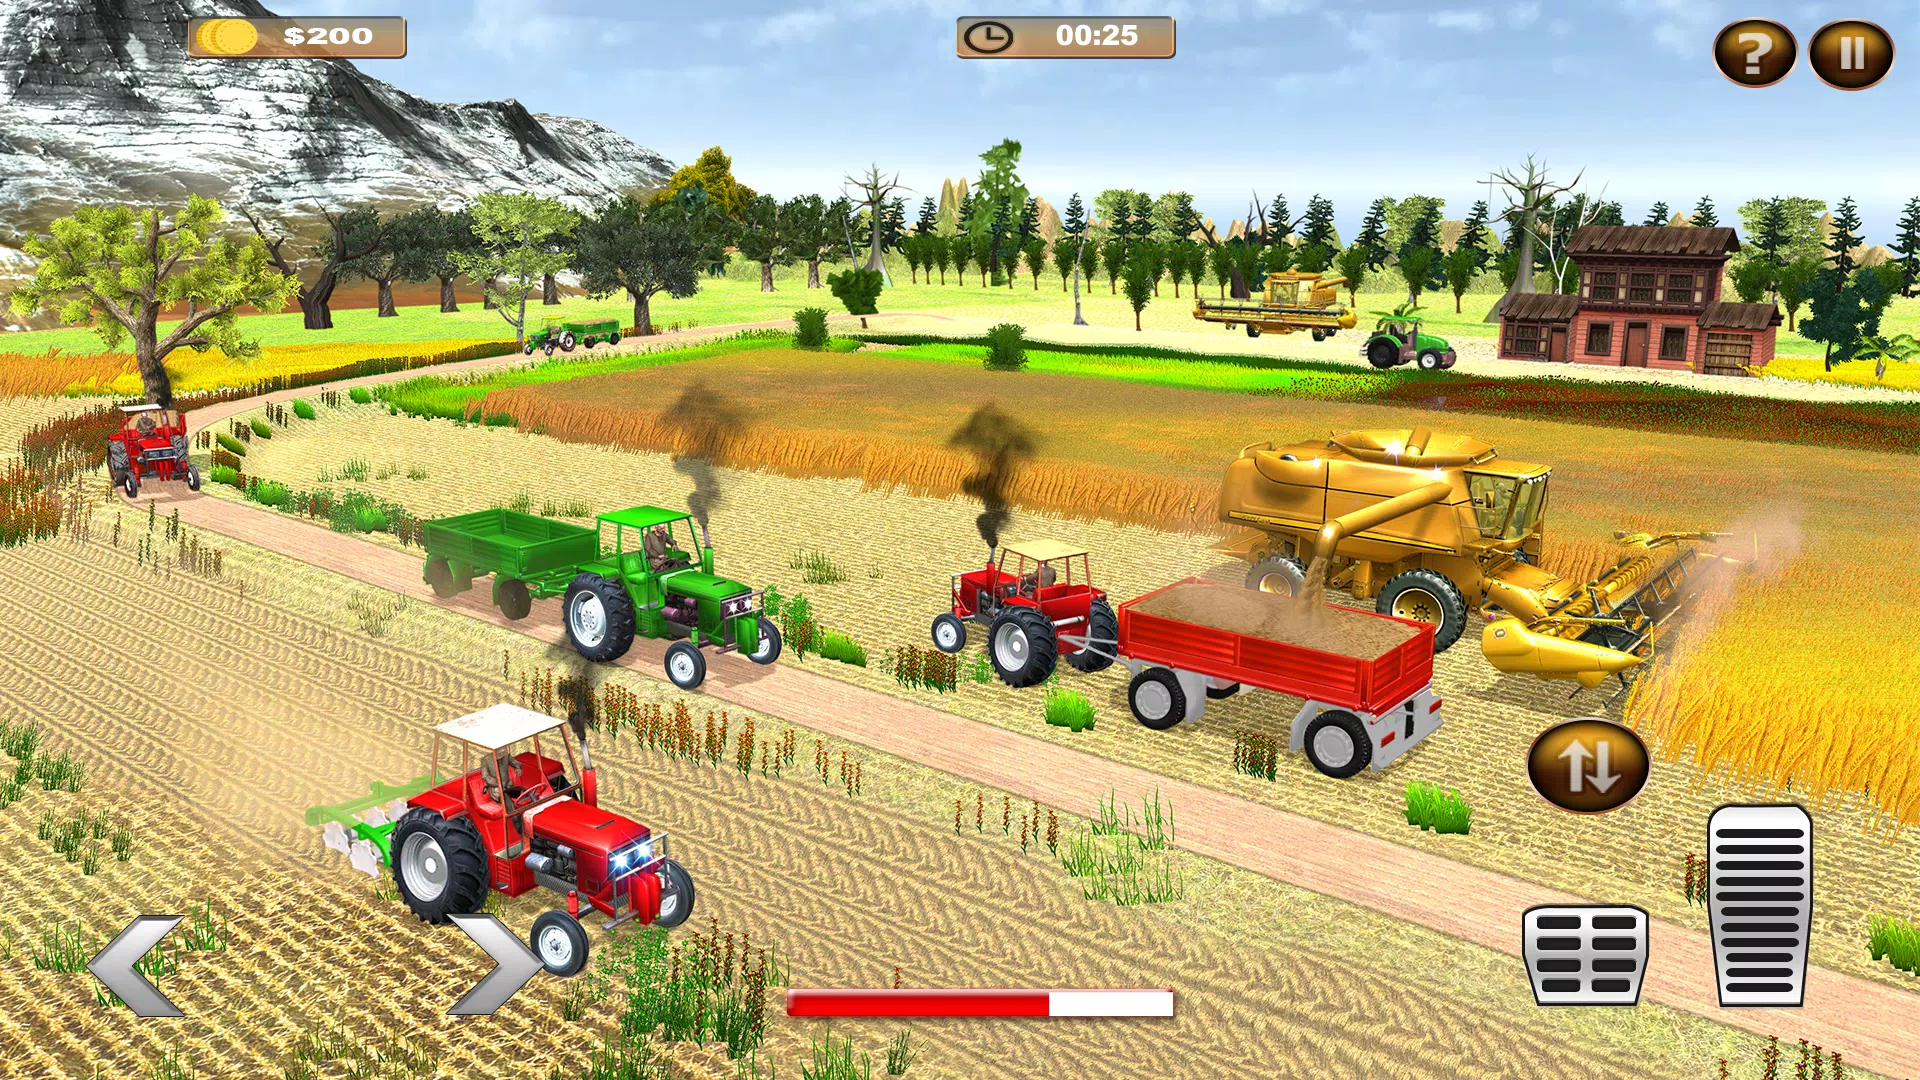 Pure Farming Simulator 2018 Real Farmer Life for Android - APK Download